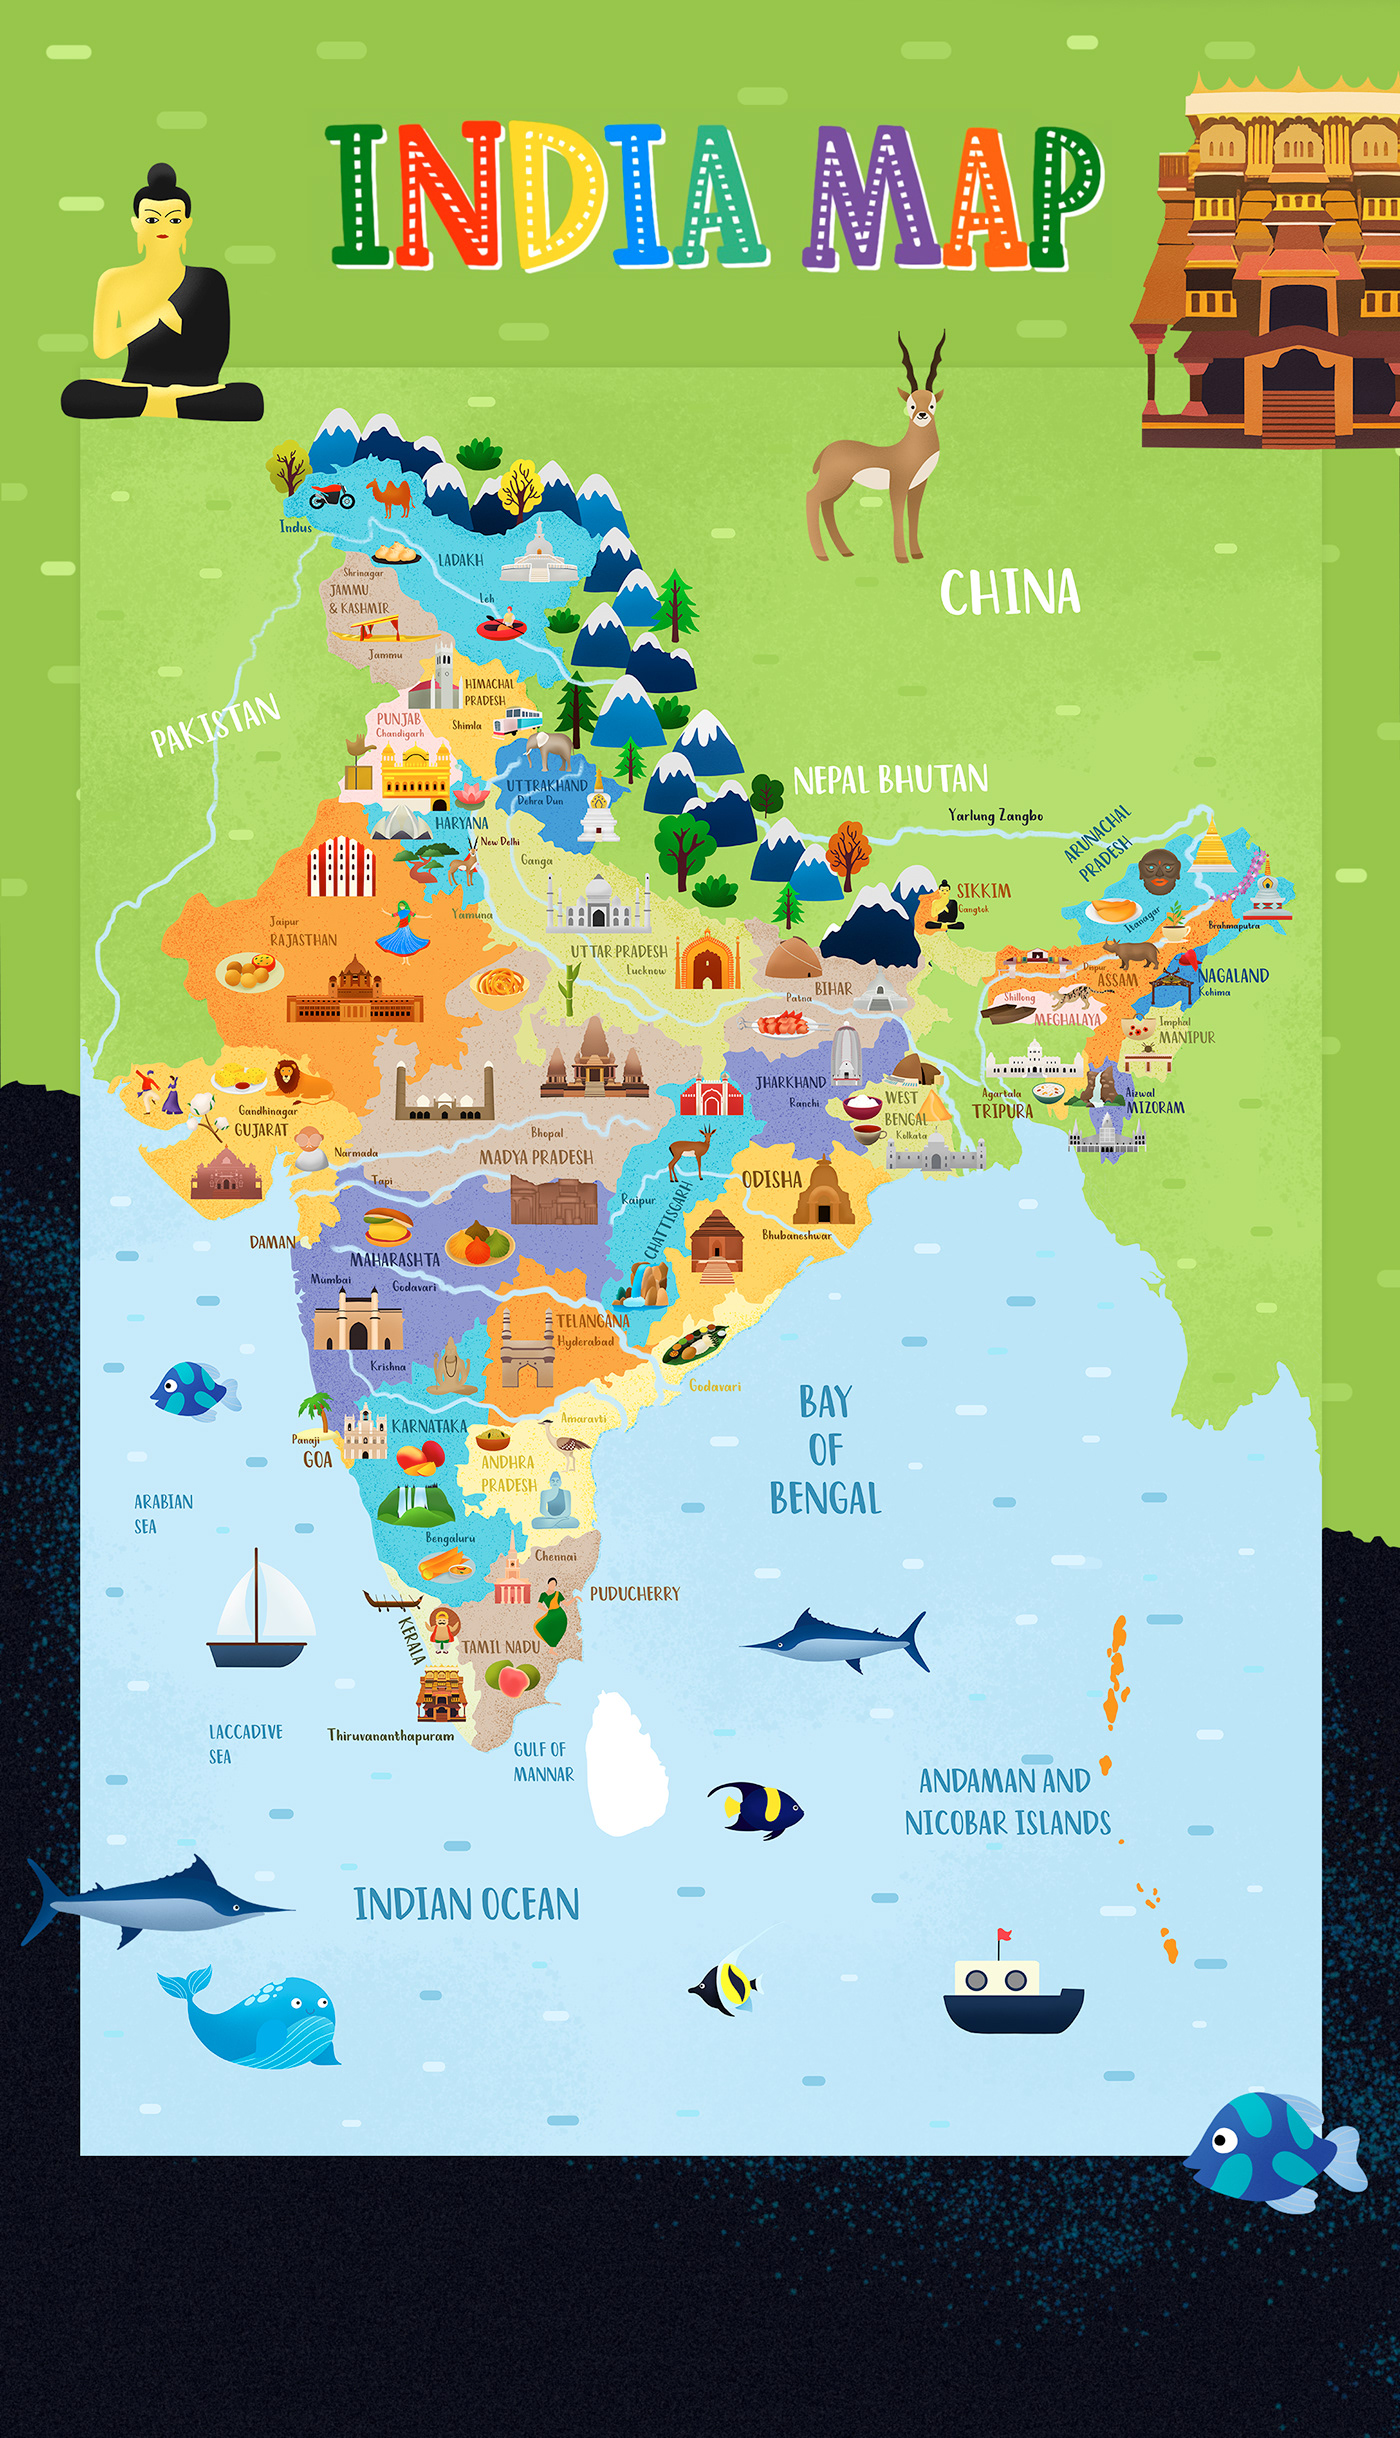 A detailed illustration depicting a map of India. The map shows the major states and regions, as wel